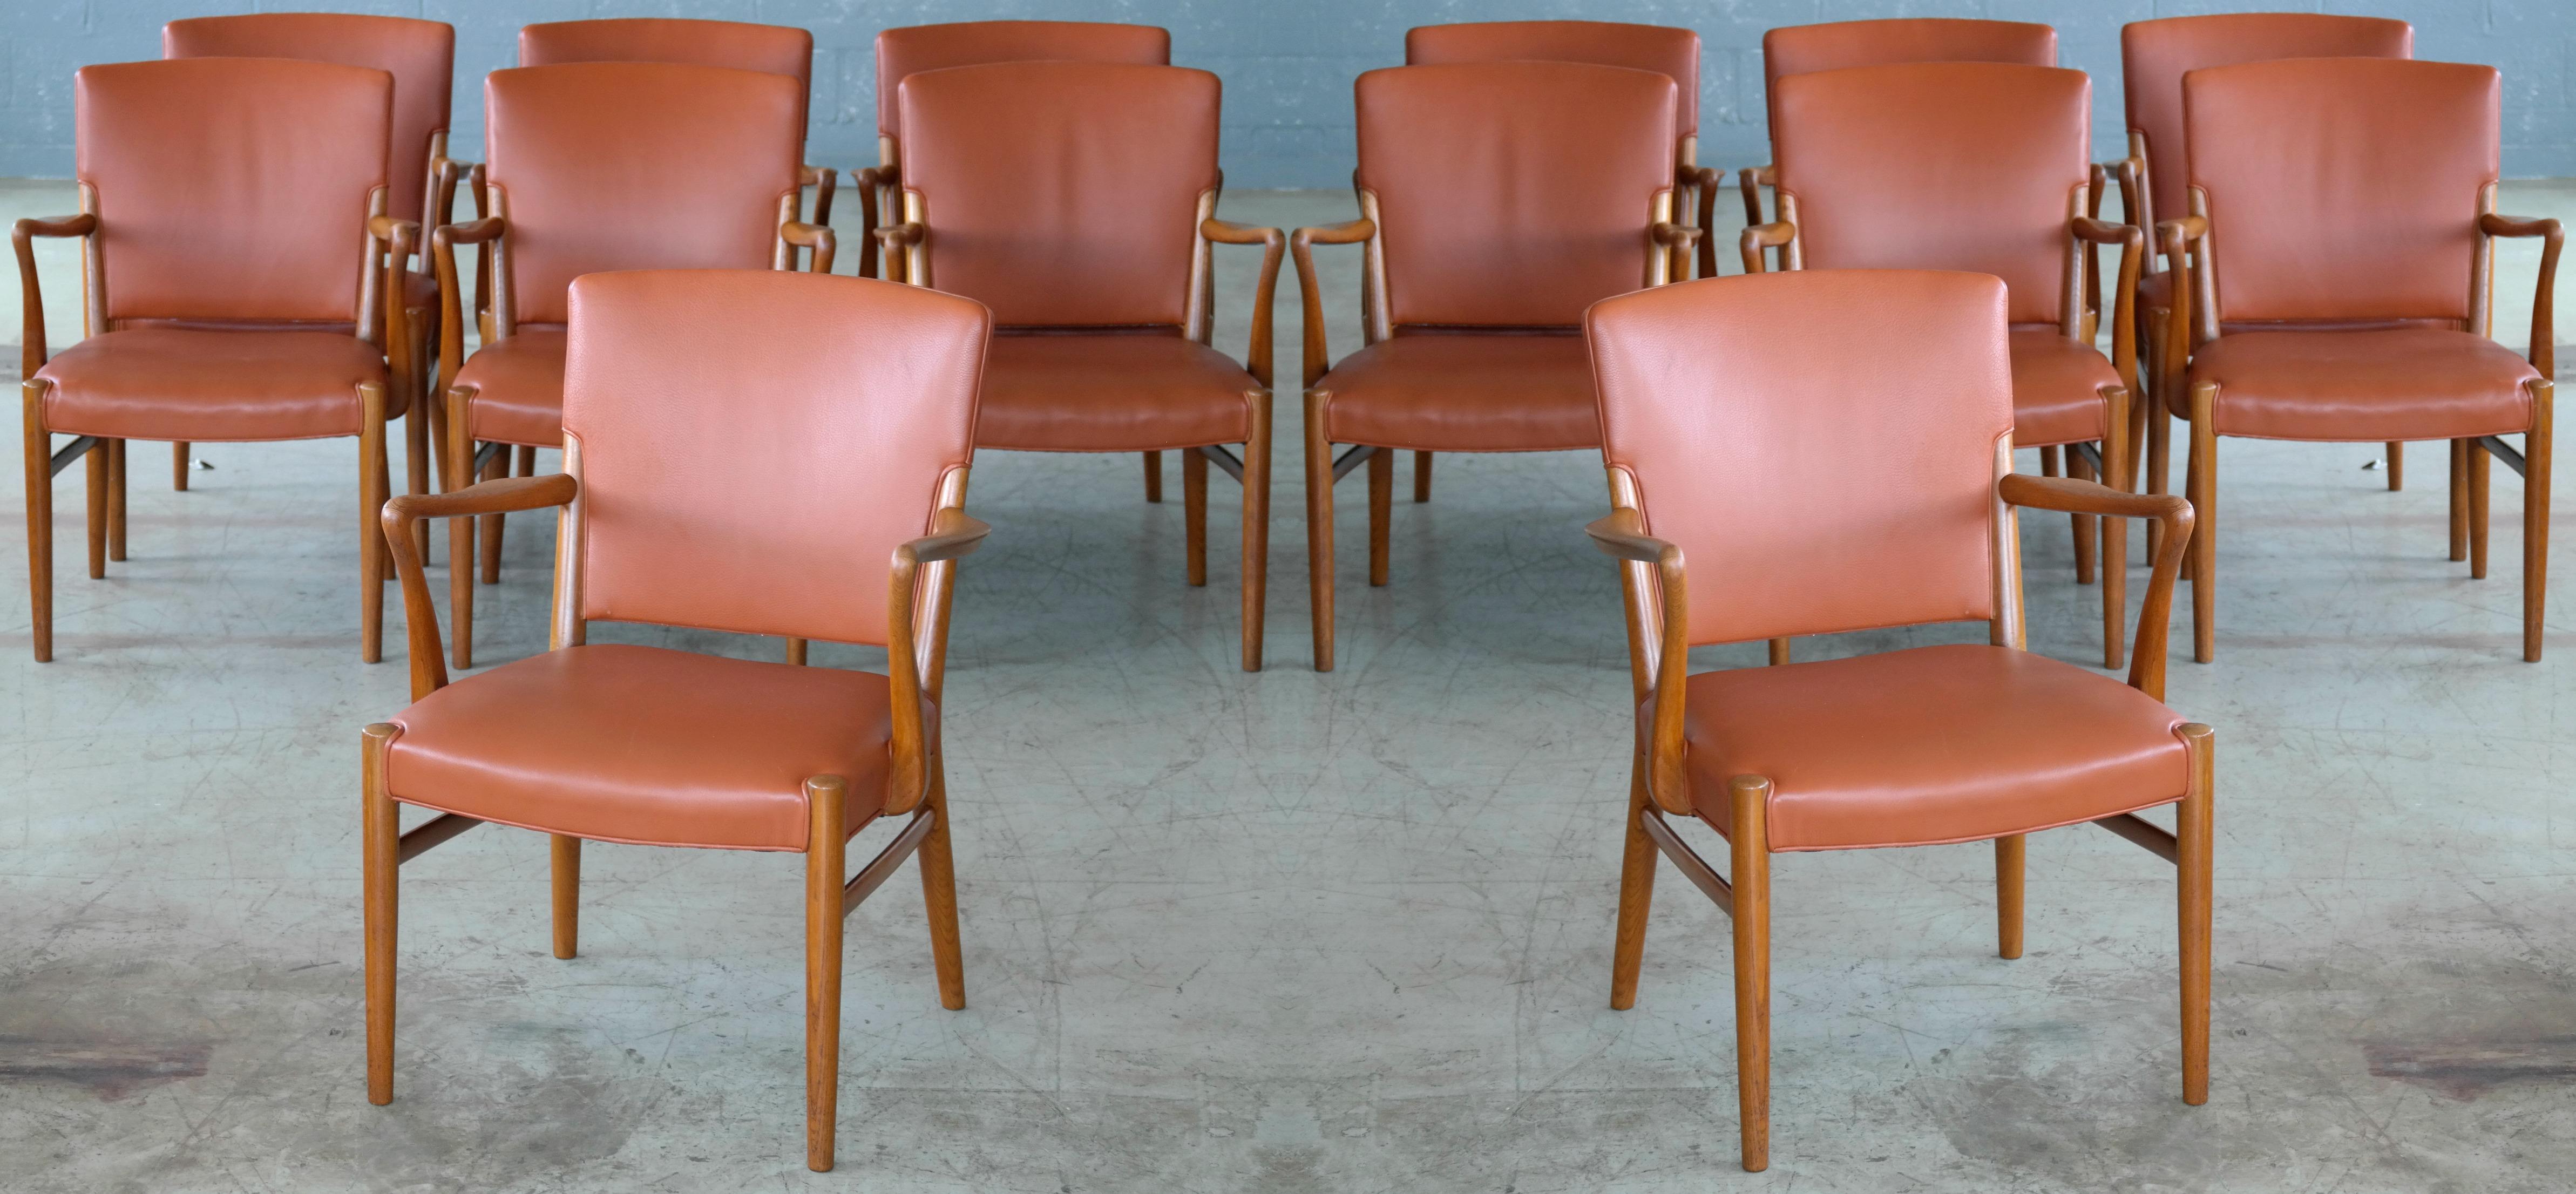 Rare to find fantastic set of 14 midcentury Danish conference chairs. Probably manufactured in the late 1960s. Beautiful armrests and legs in carved elm wood with great grain and color. The chairs are very much in the style of Fritz Hansen but the